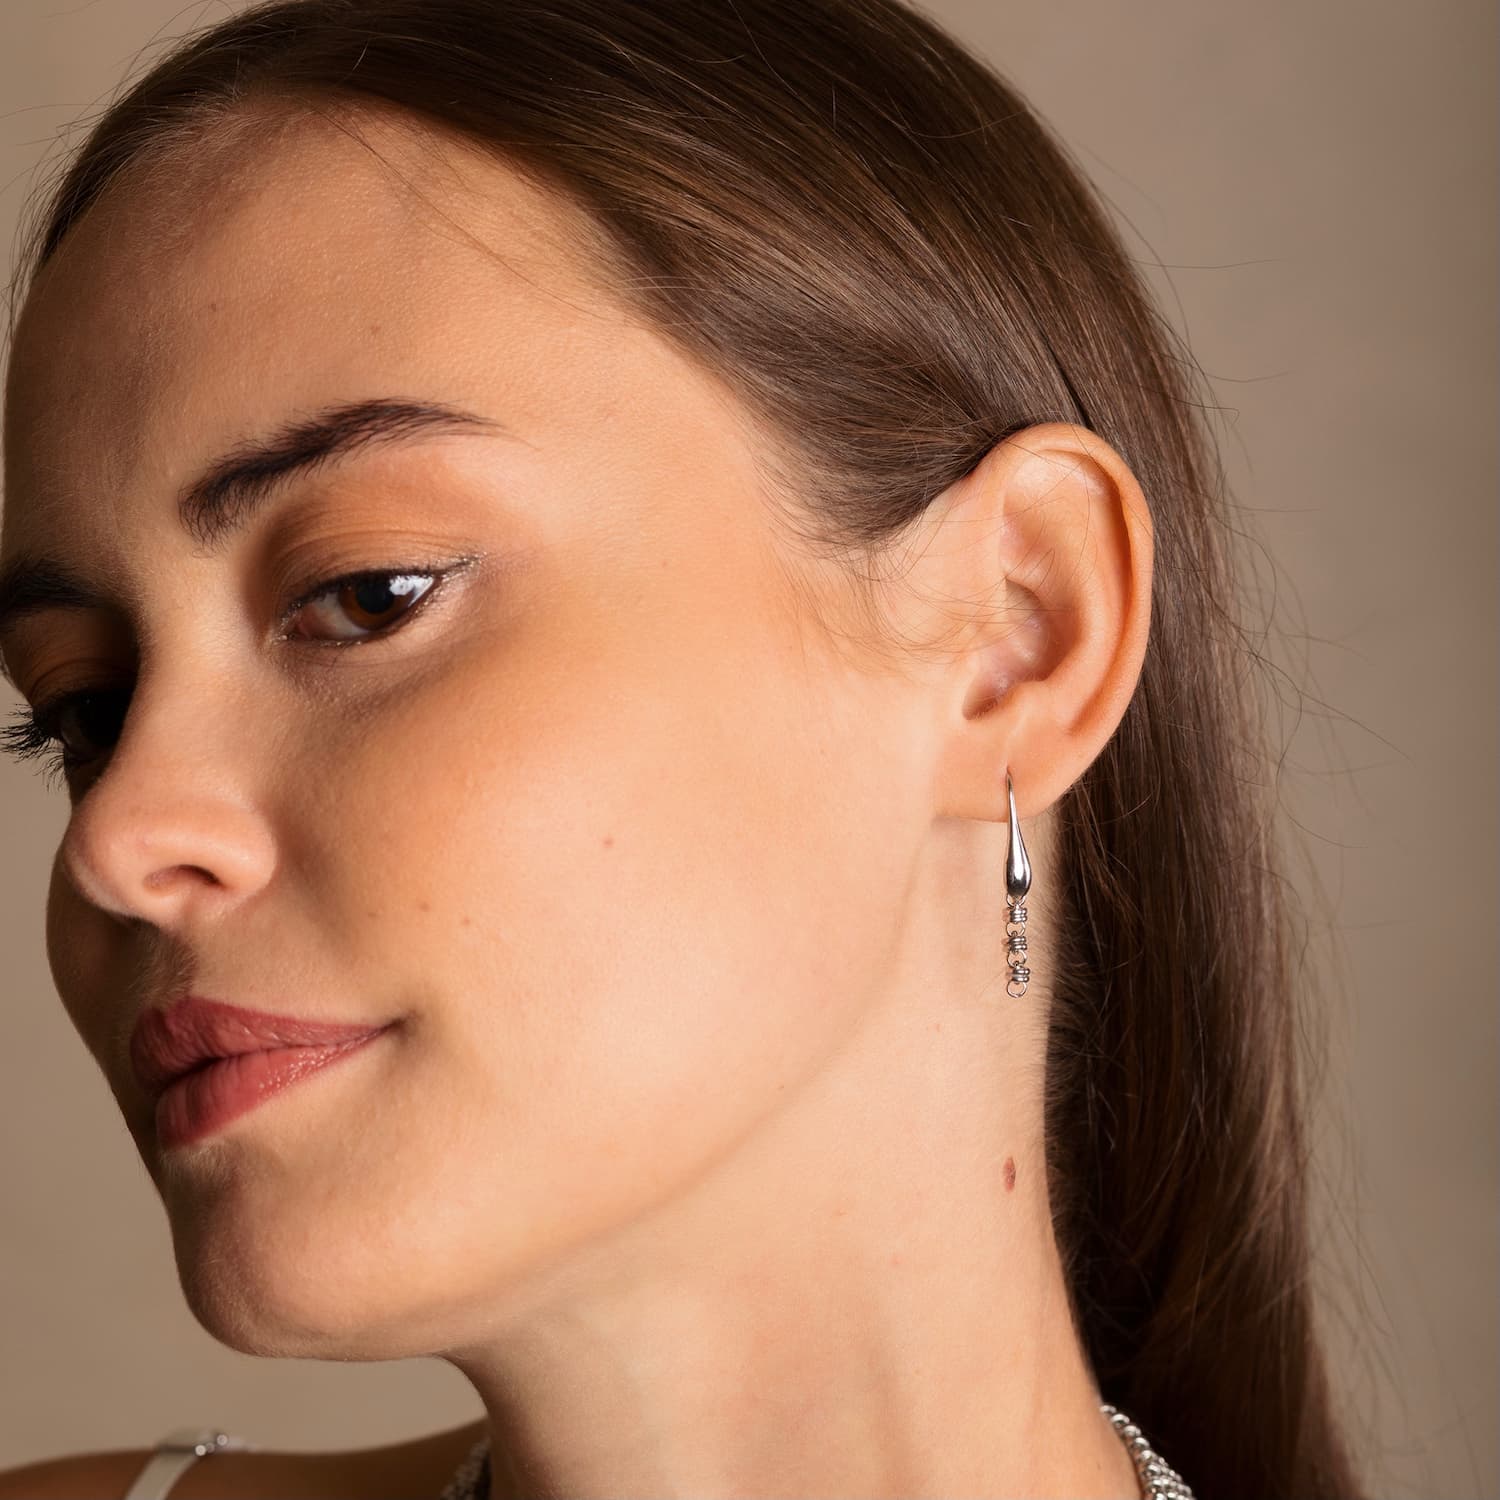 A model tilting her head while wearing silver chain earrings designed and hand-crafted by DelBrenna Italian Jewelers in Tuscany. The earrings and necklace shown here are designed based on the iconic Links collection of DelBrenna silver chains, necklaces, rings, and bracelets. 